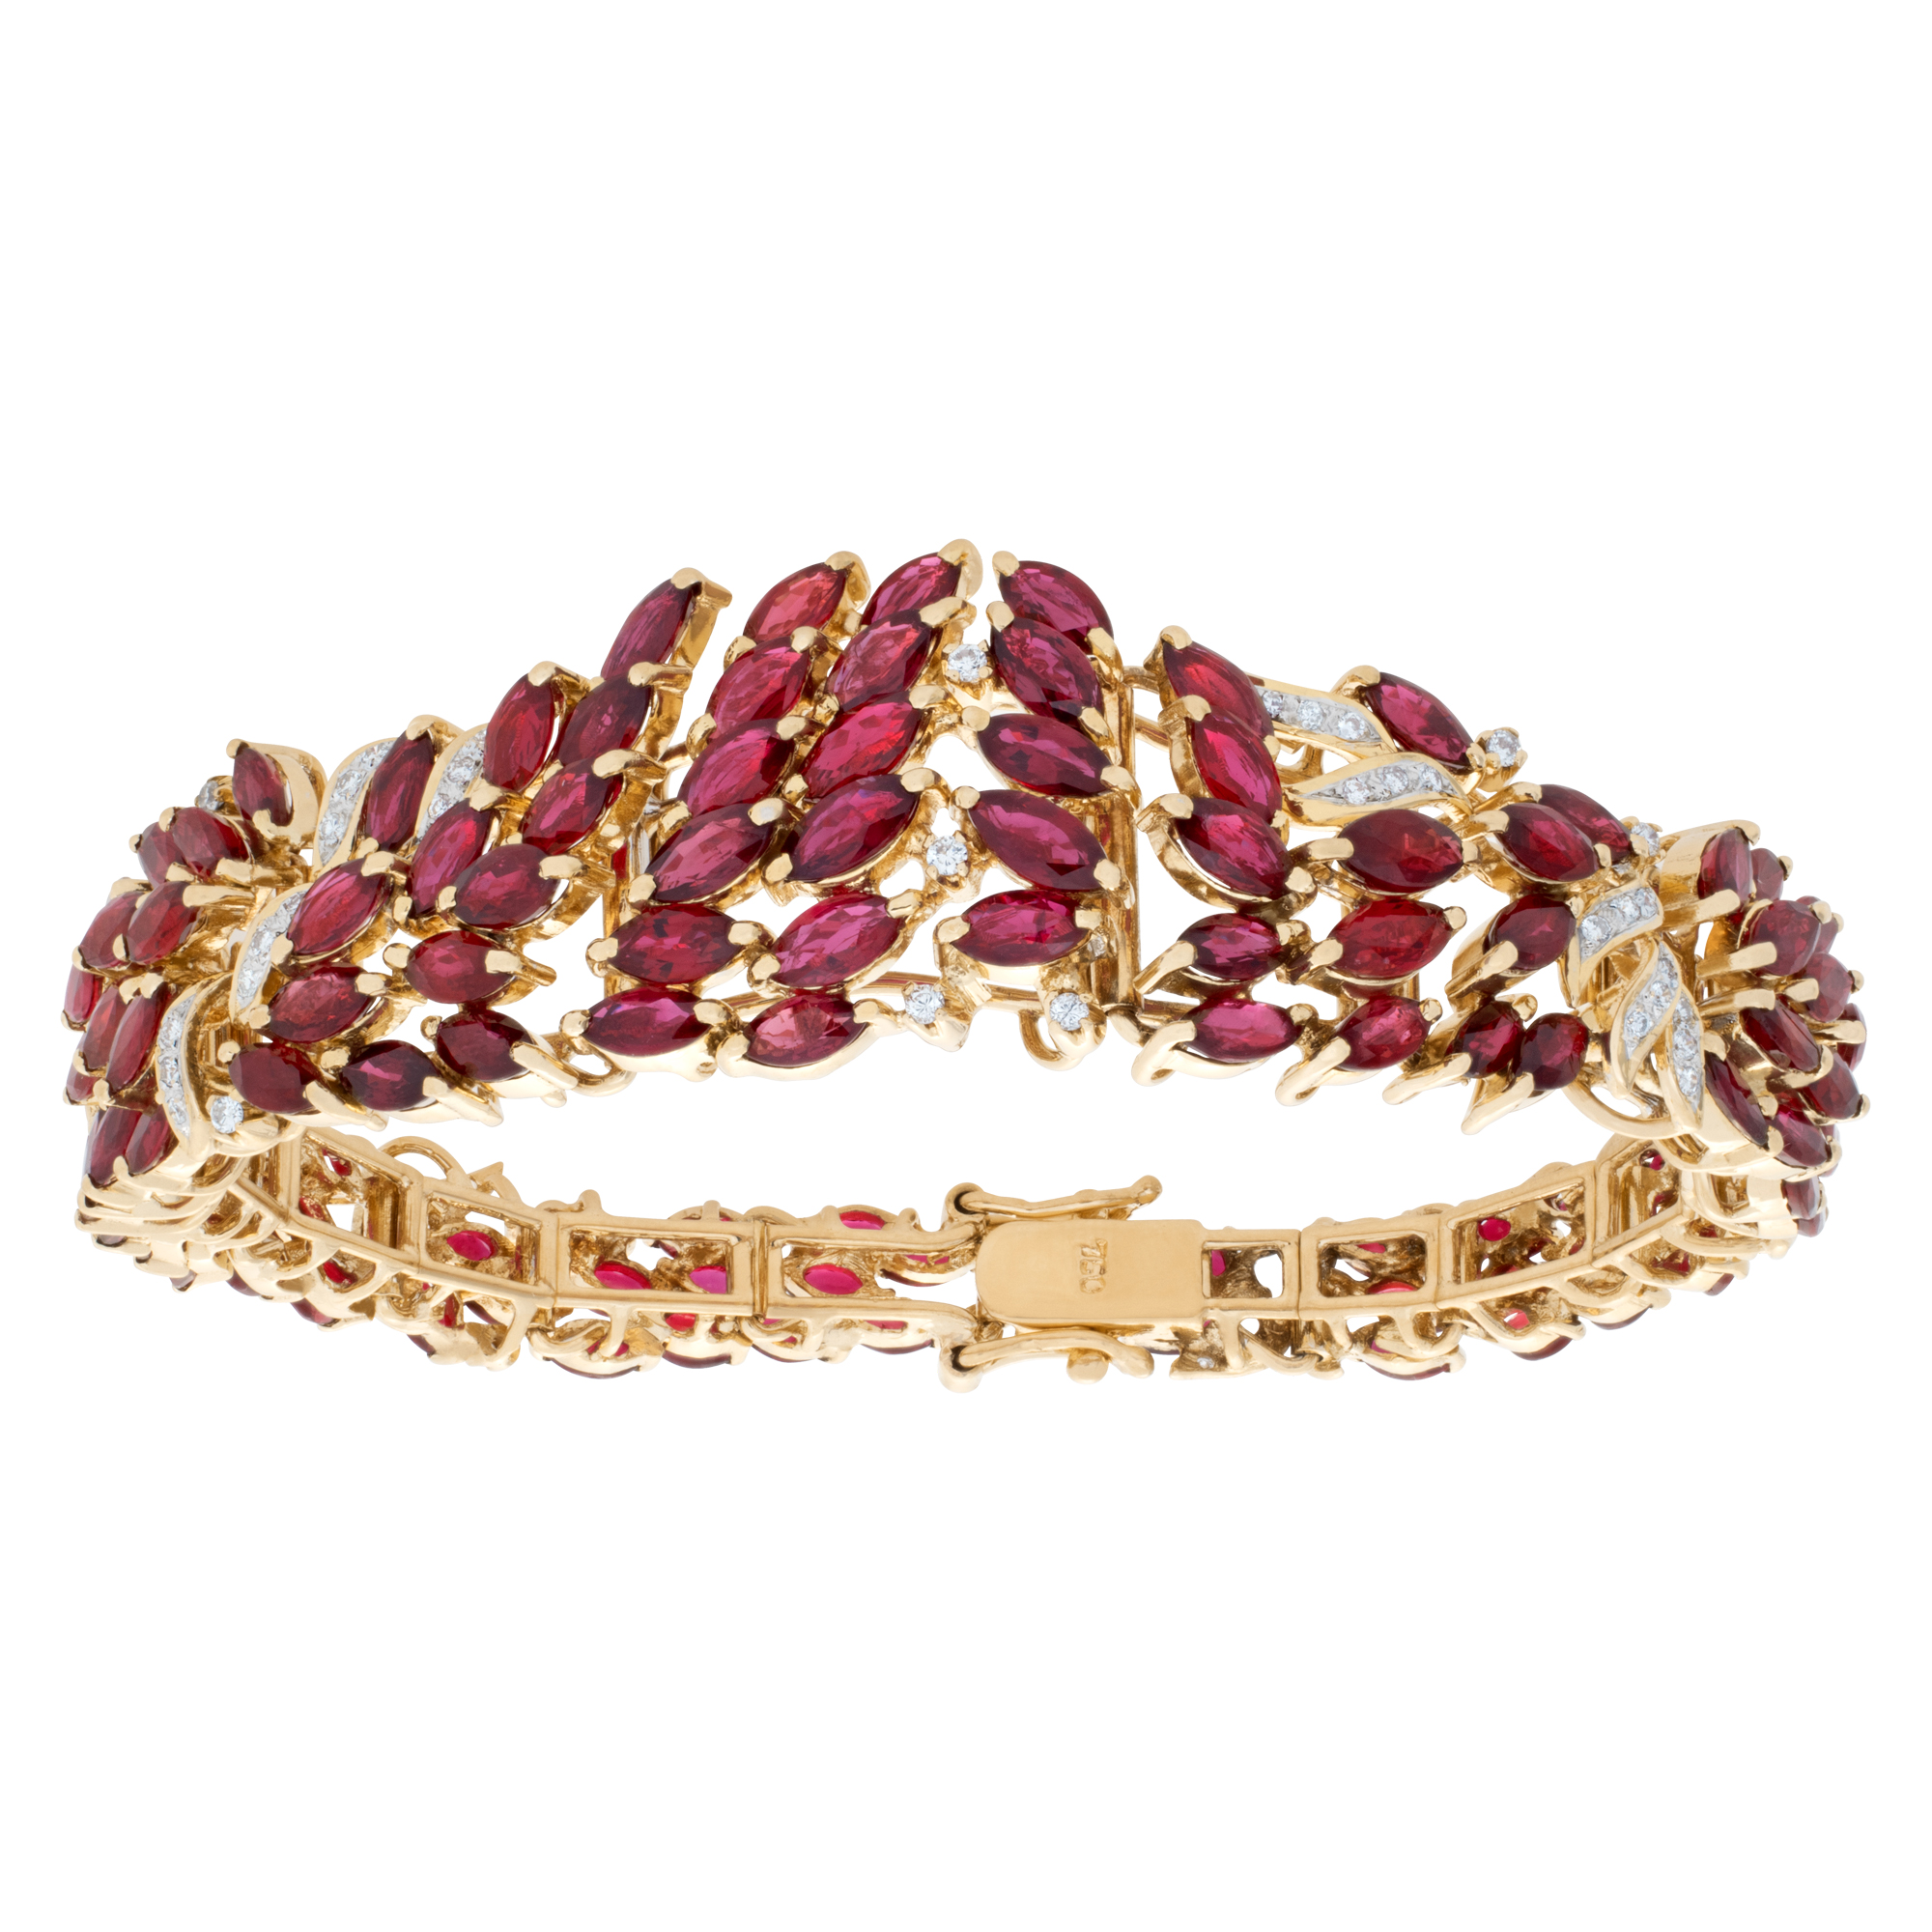 Diamond and ruby bracelet in 18k yellow gold, image 1